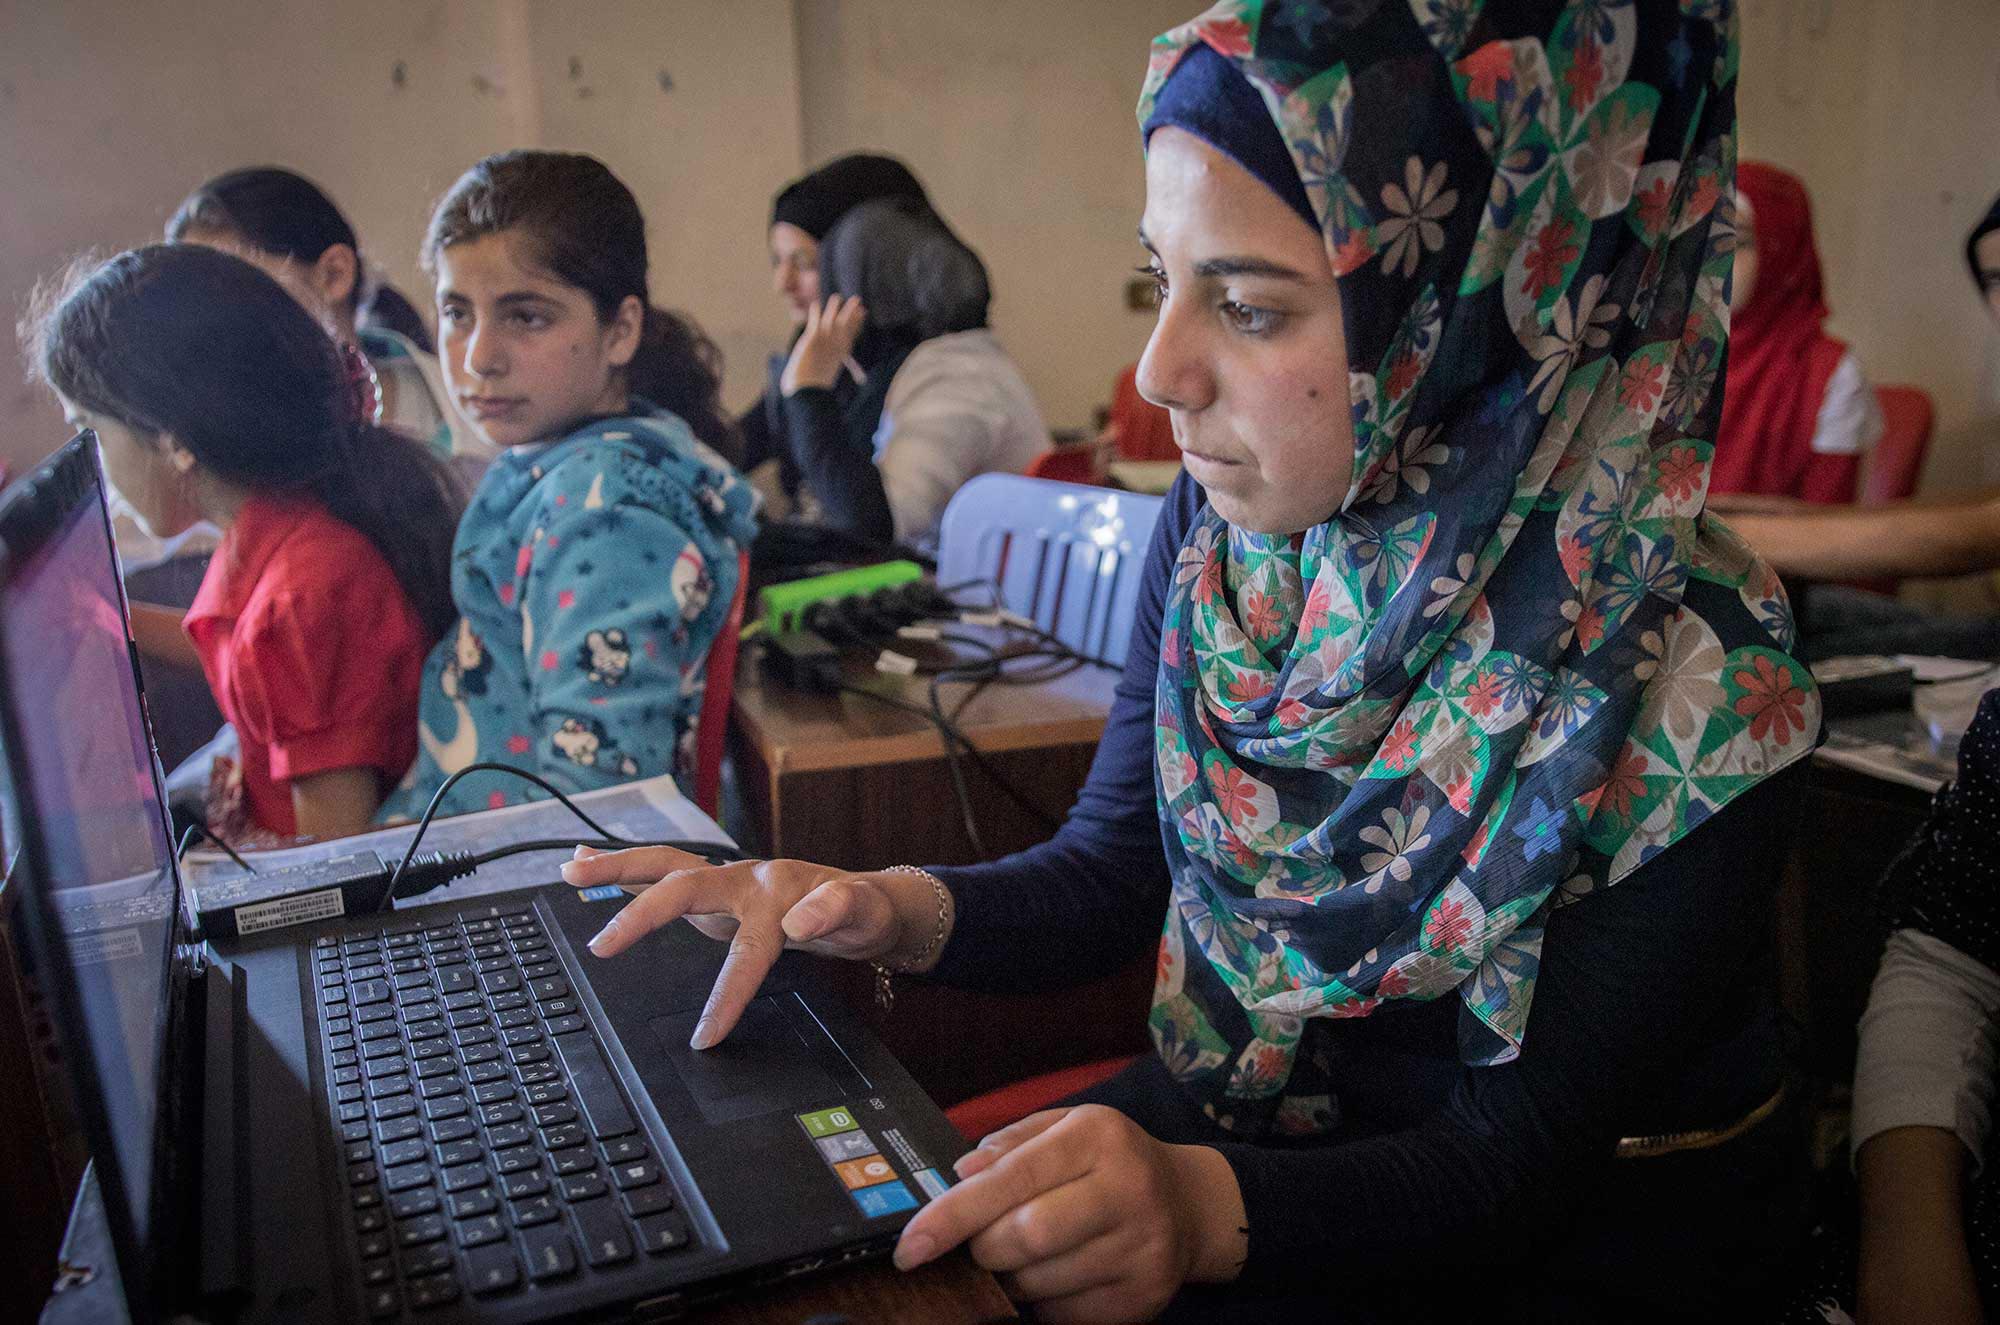 Refugee education in Lebanon includes computer courses for this Syrian girl